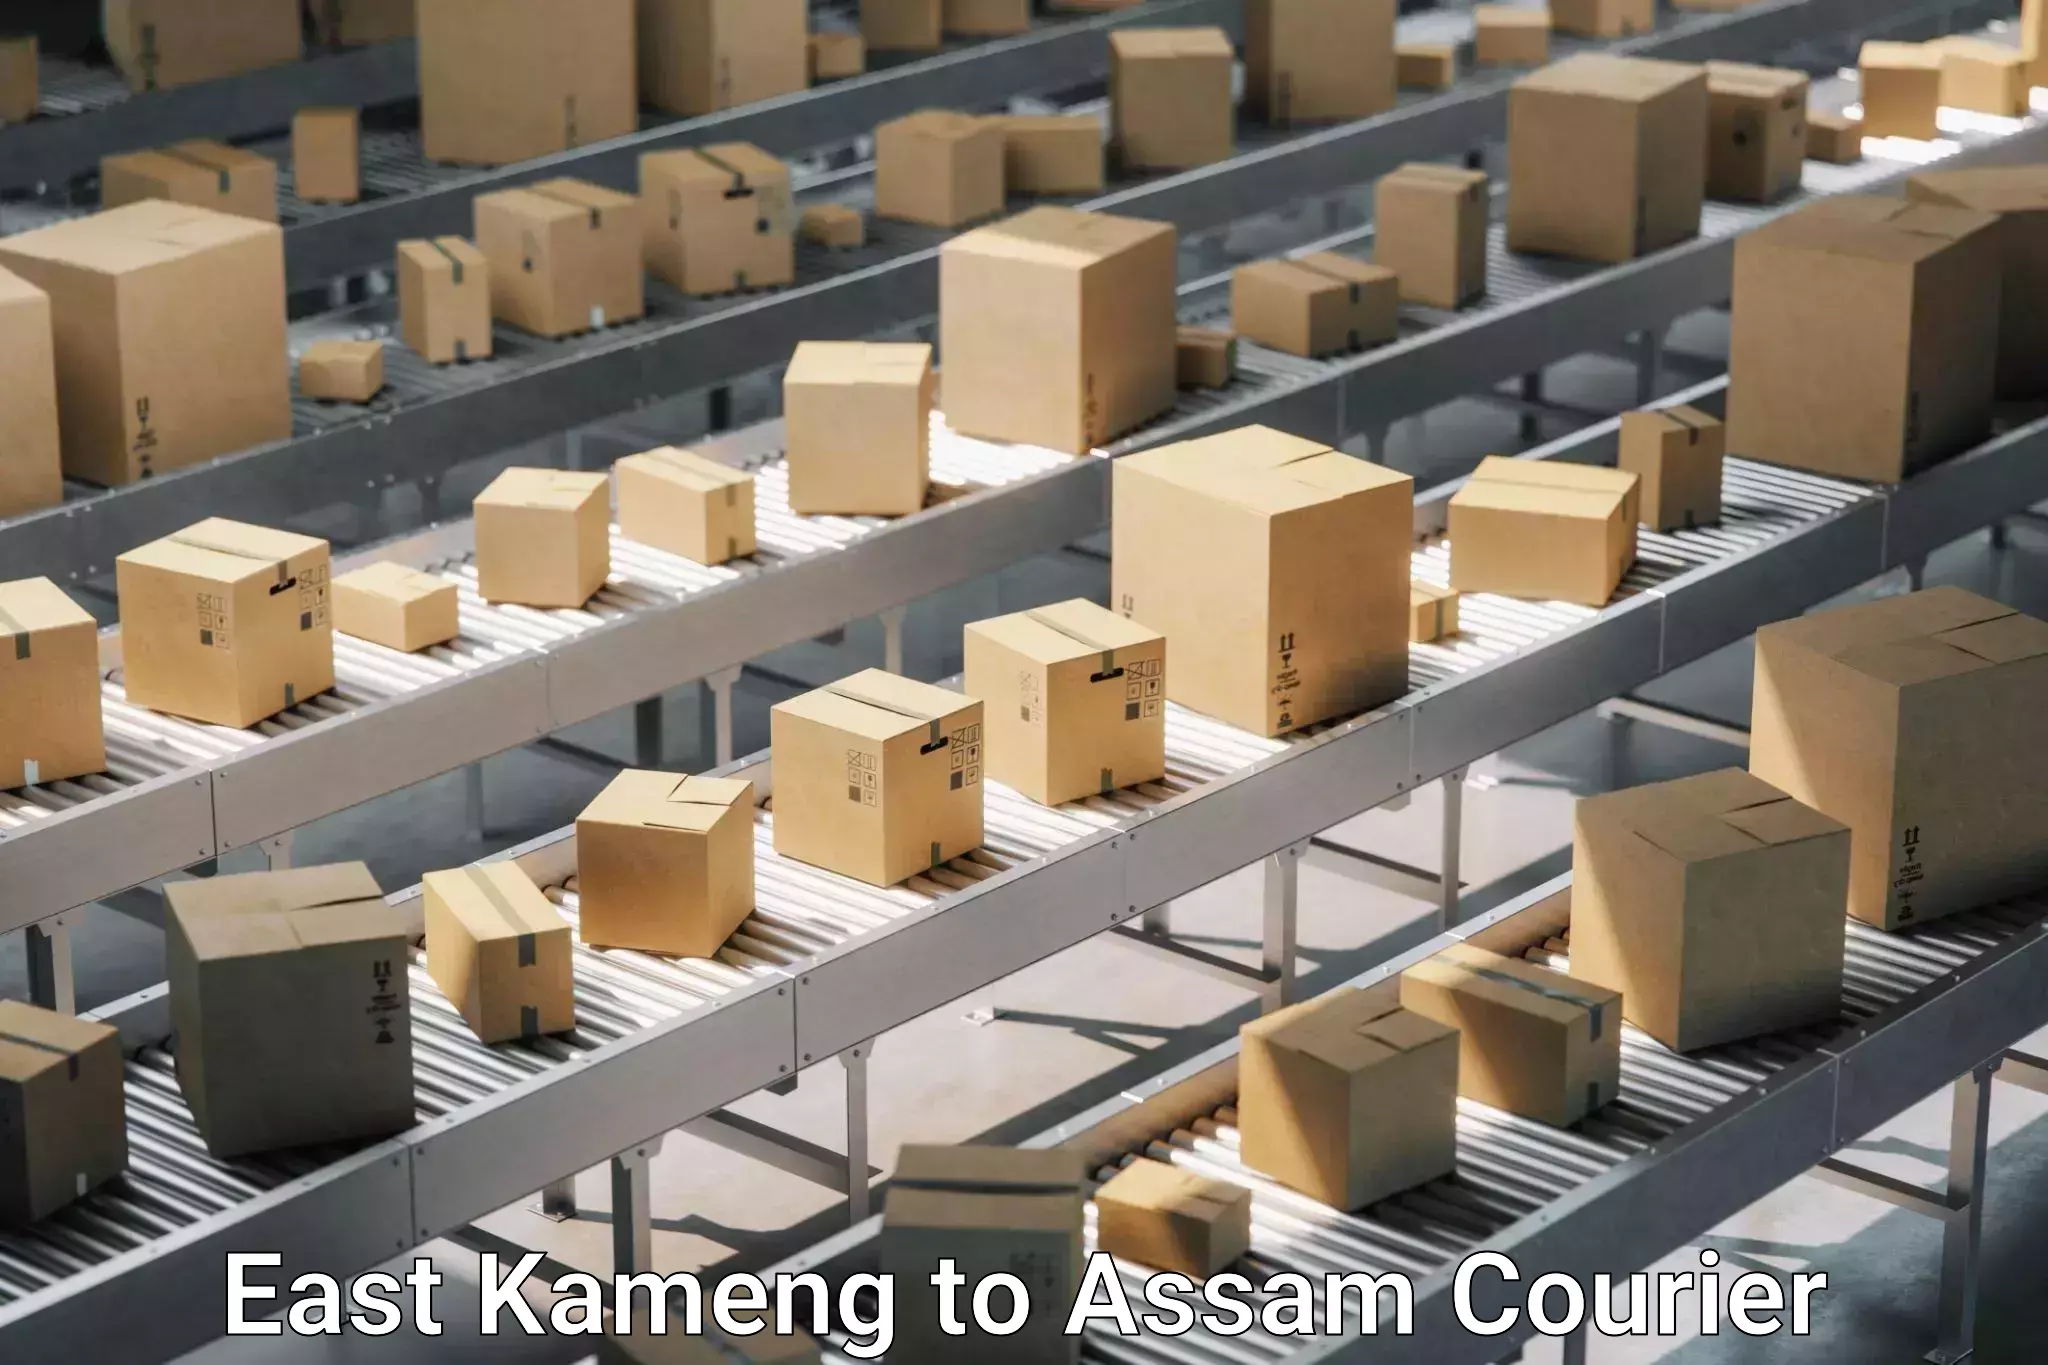 Trusted relocation experts East Kameng to Assam